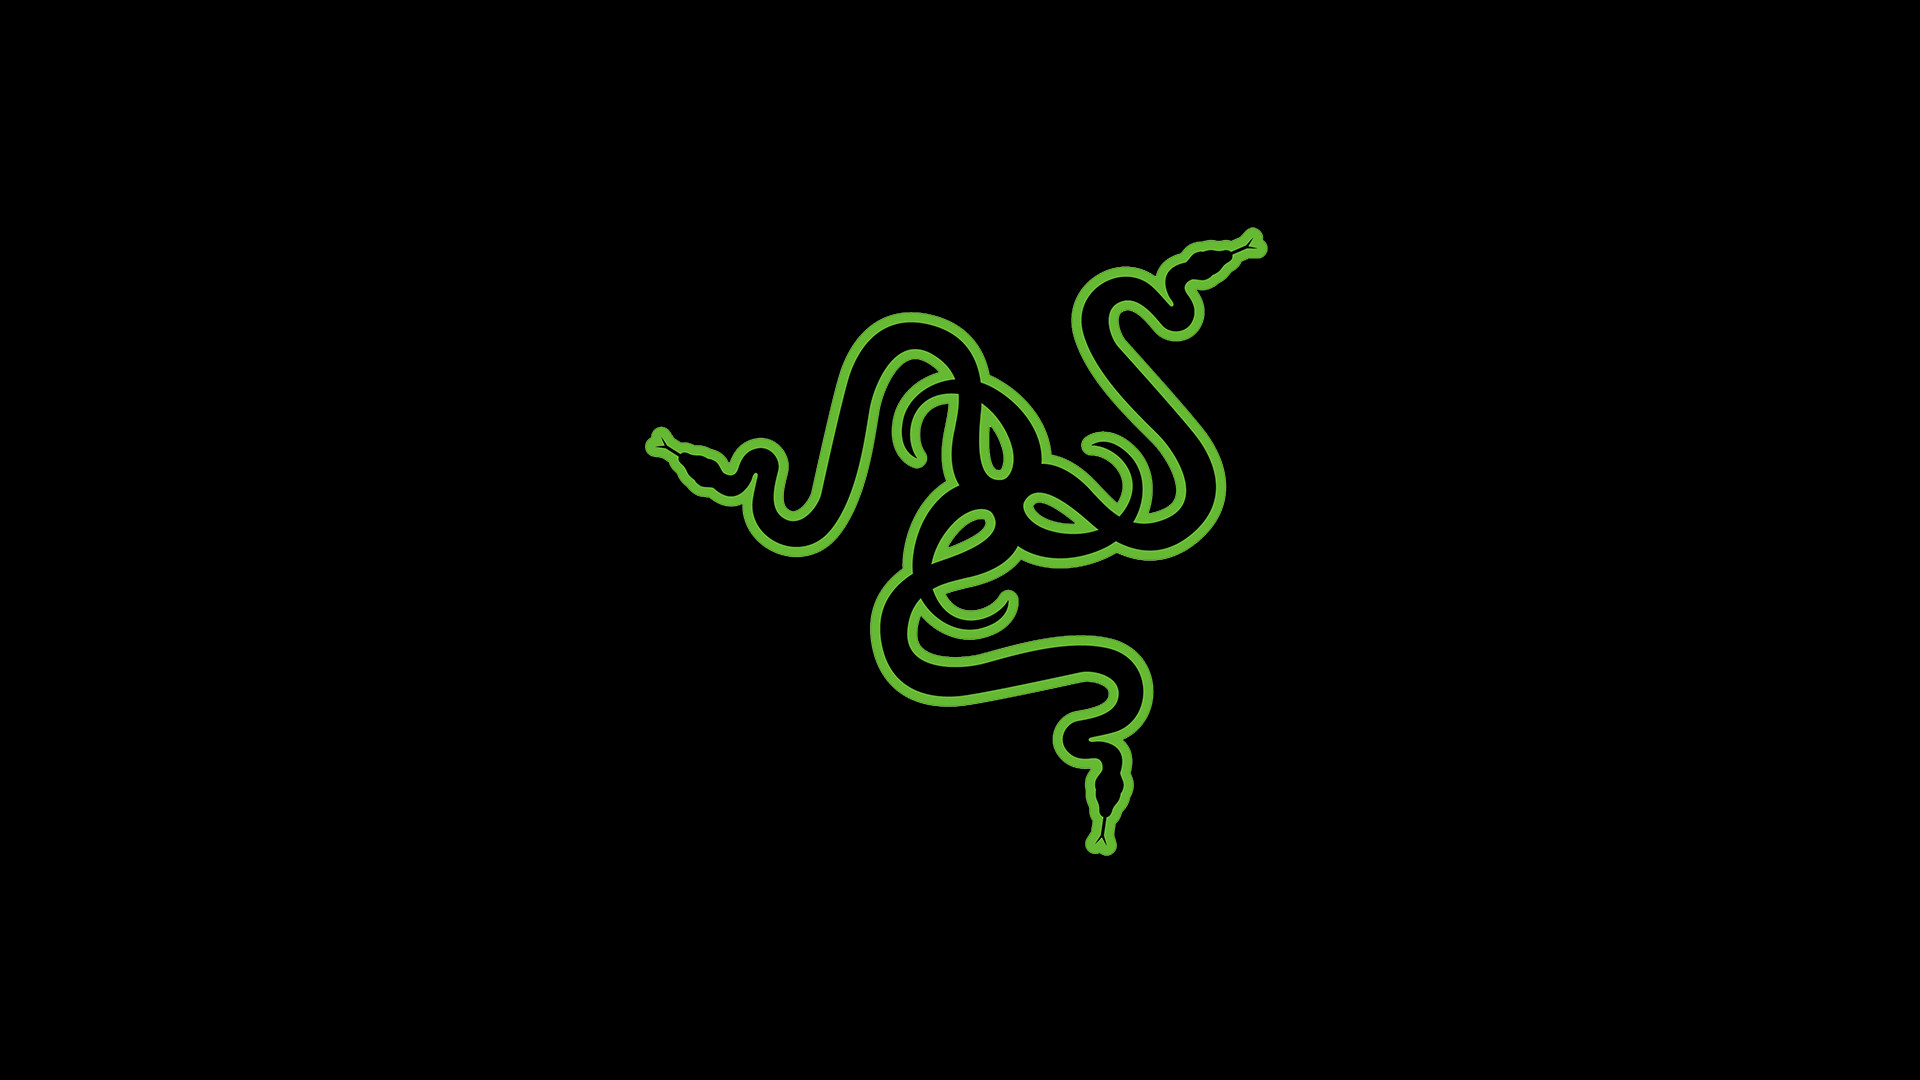 1920x1080 () Made this minimalist wallpaper for Razer fans.